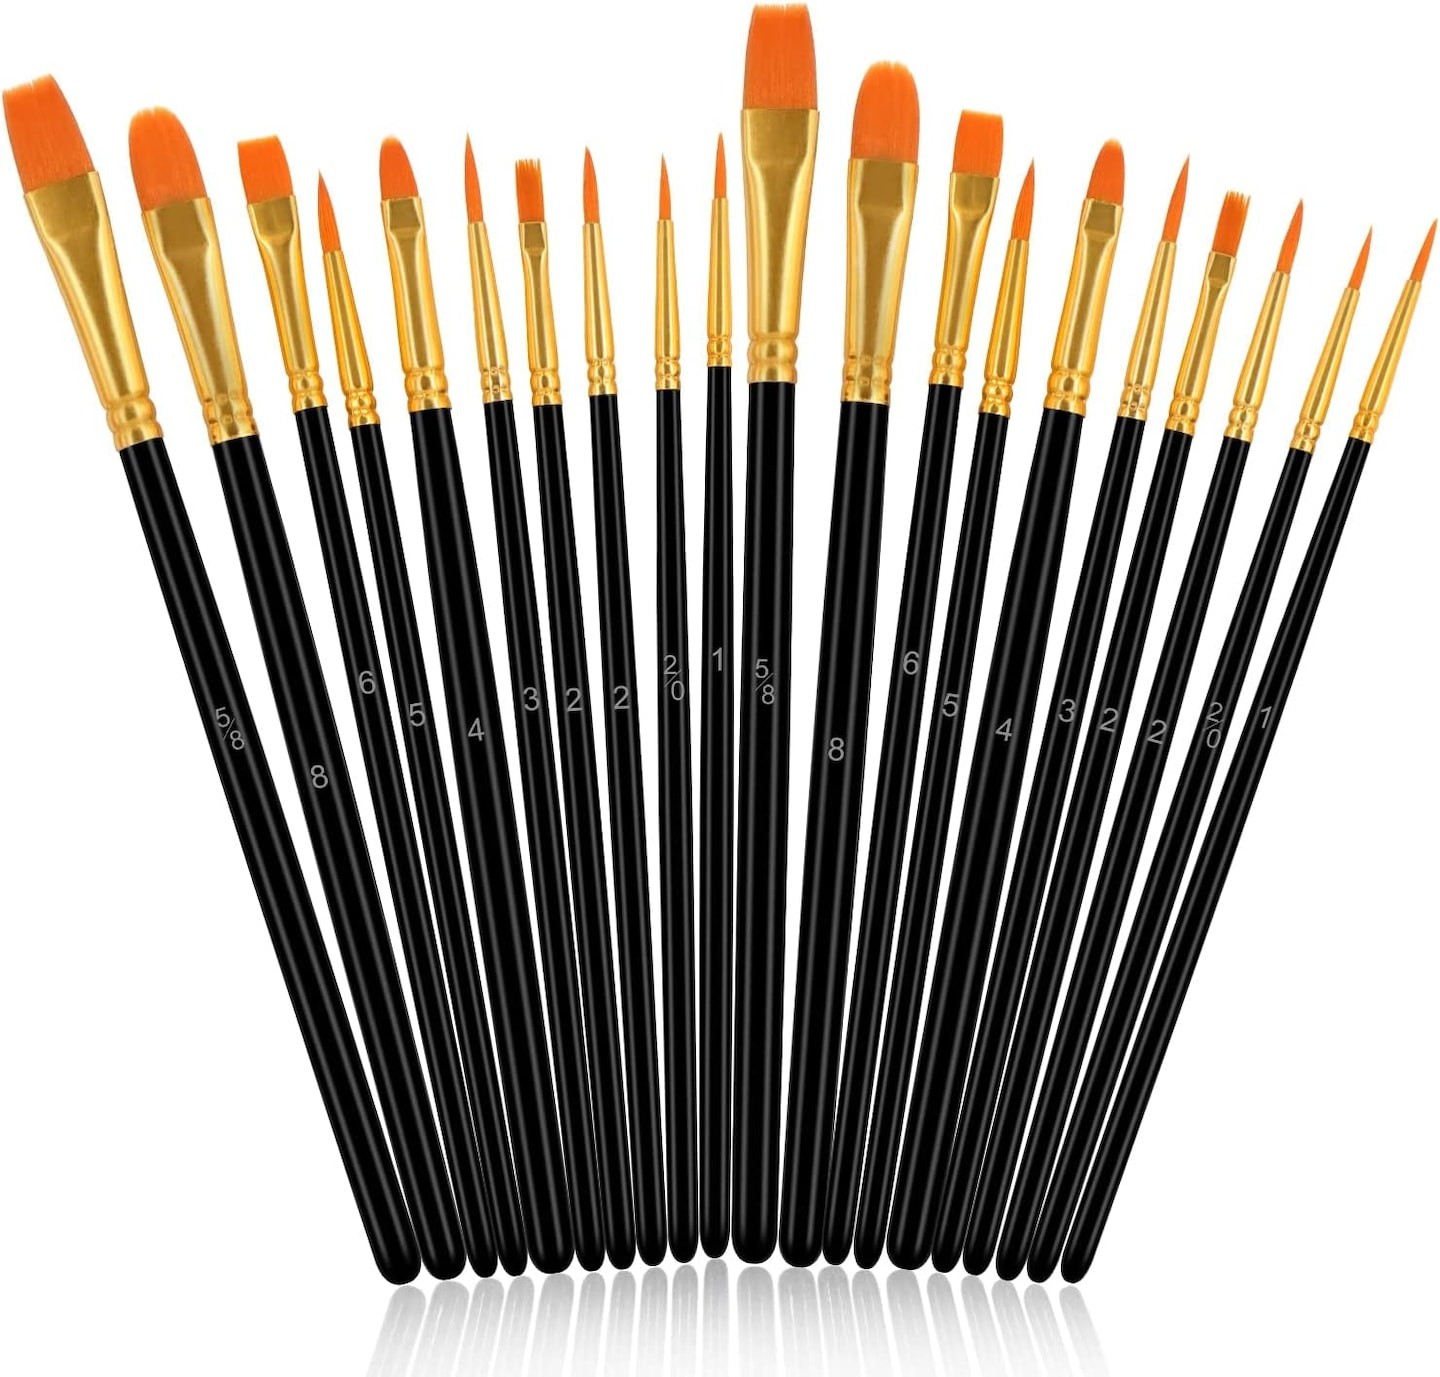 Hello Hobby Round Synthetic Bristle Art Brushes (30 Pack), Age Group 3+